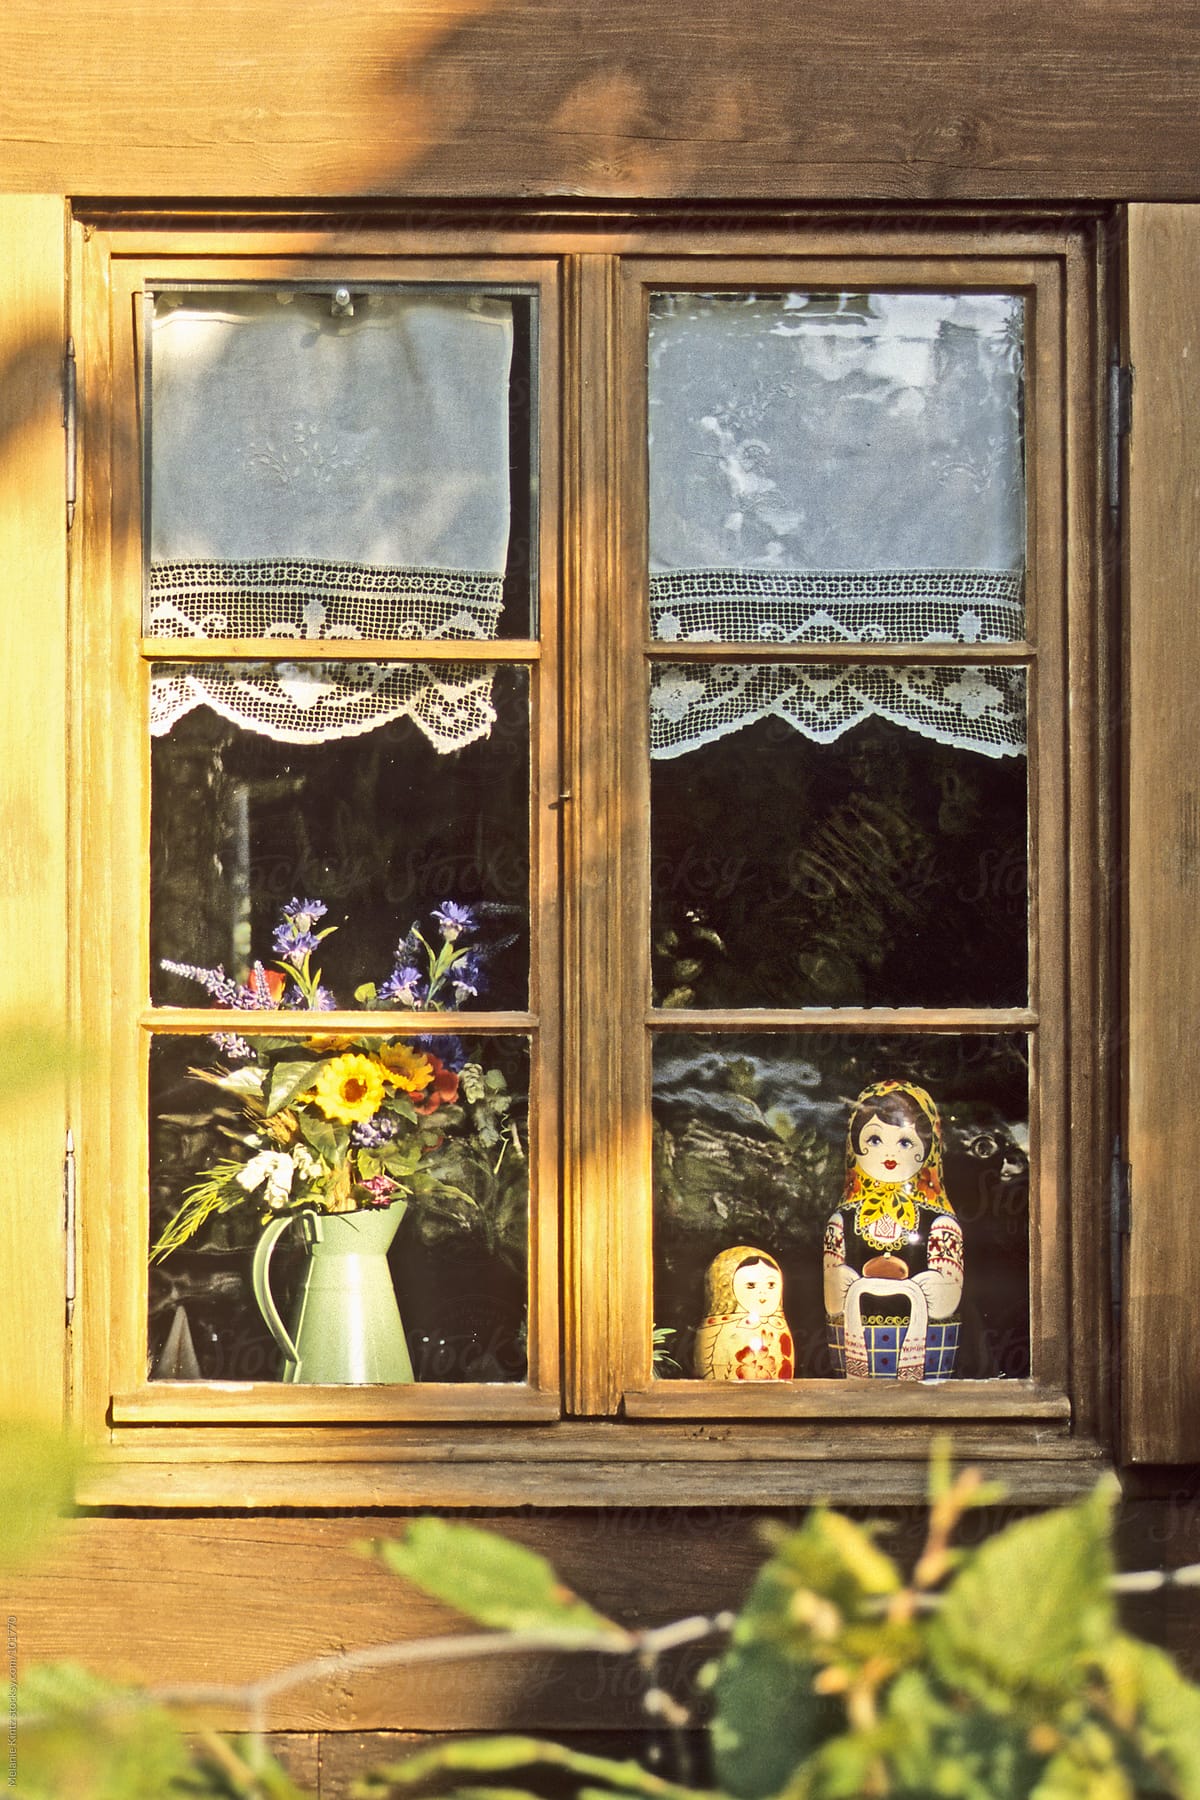 Russian style decorated window on a sunny day